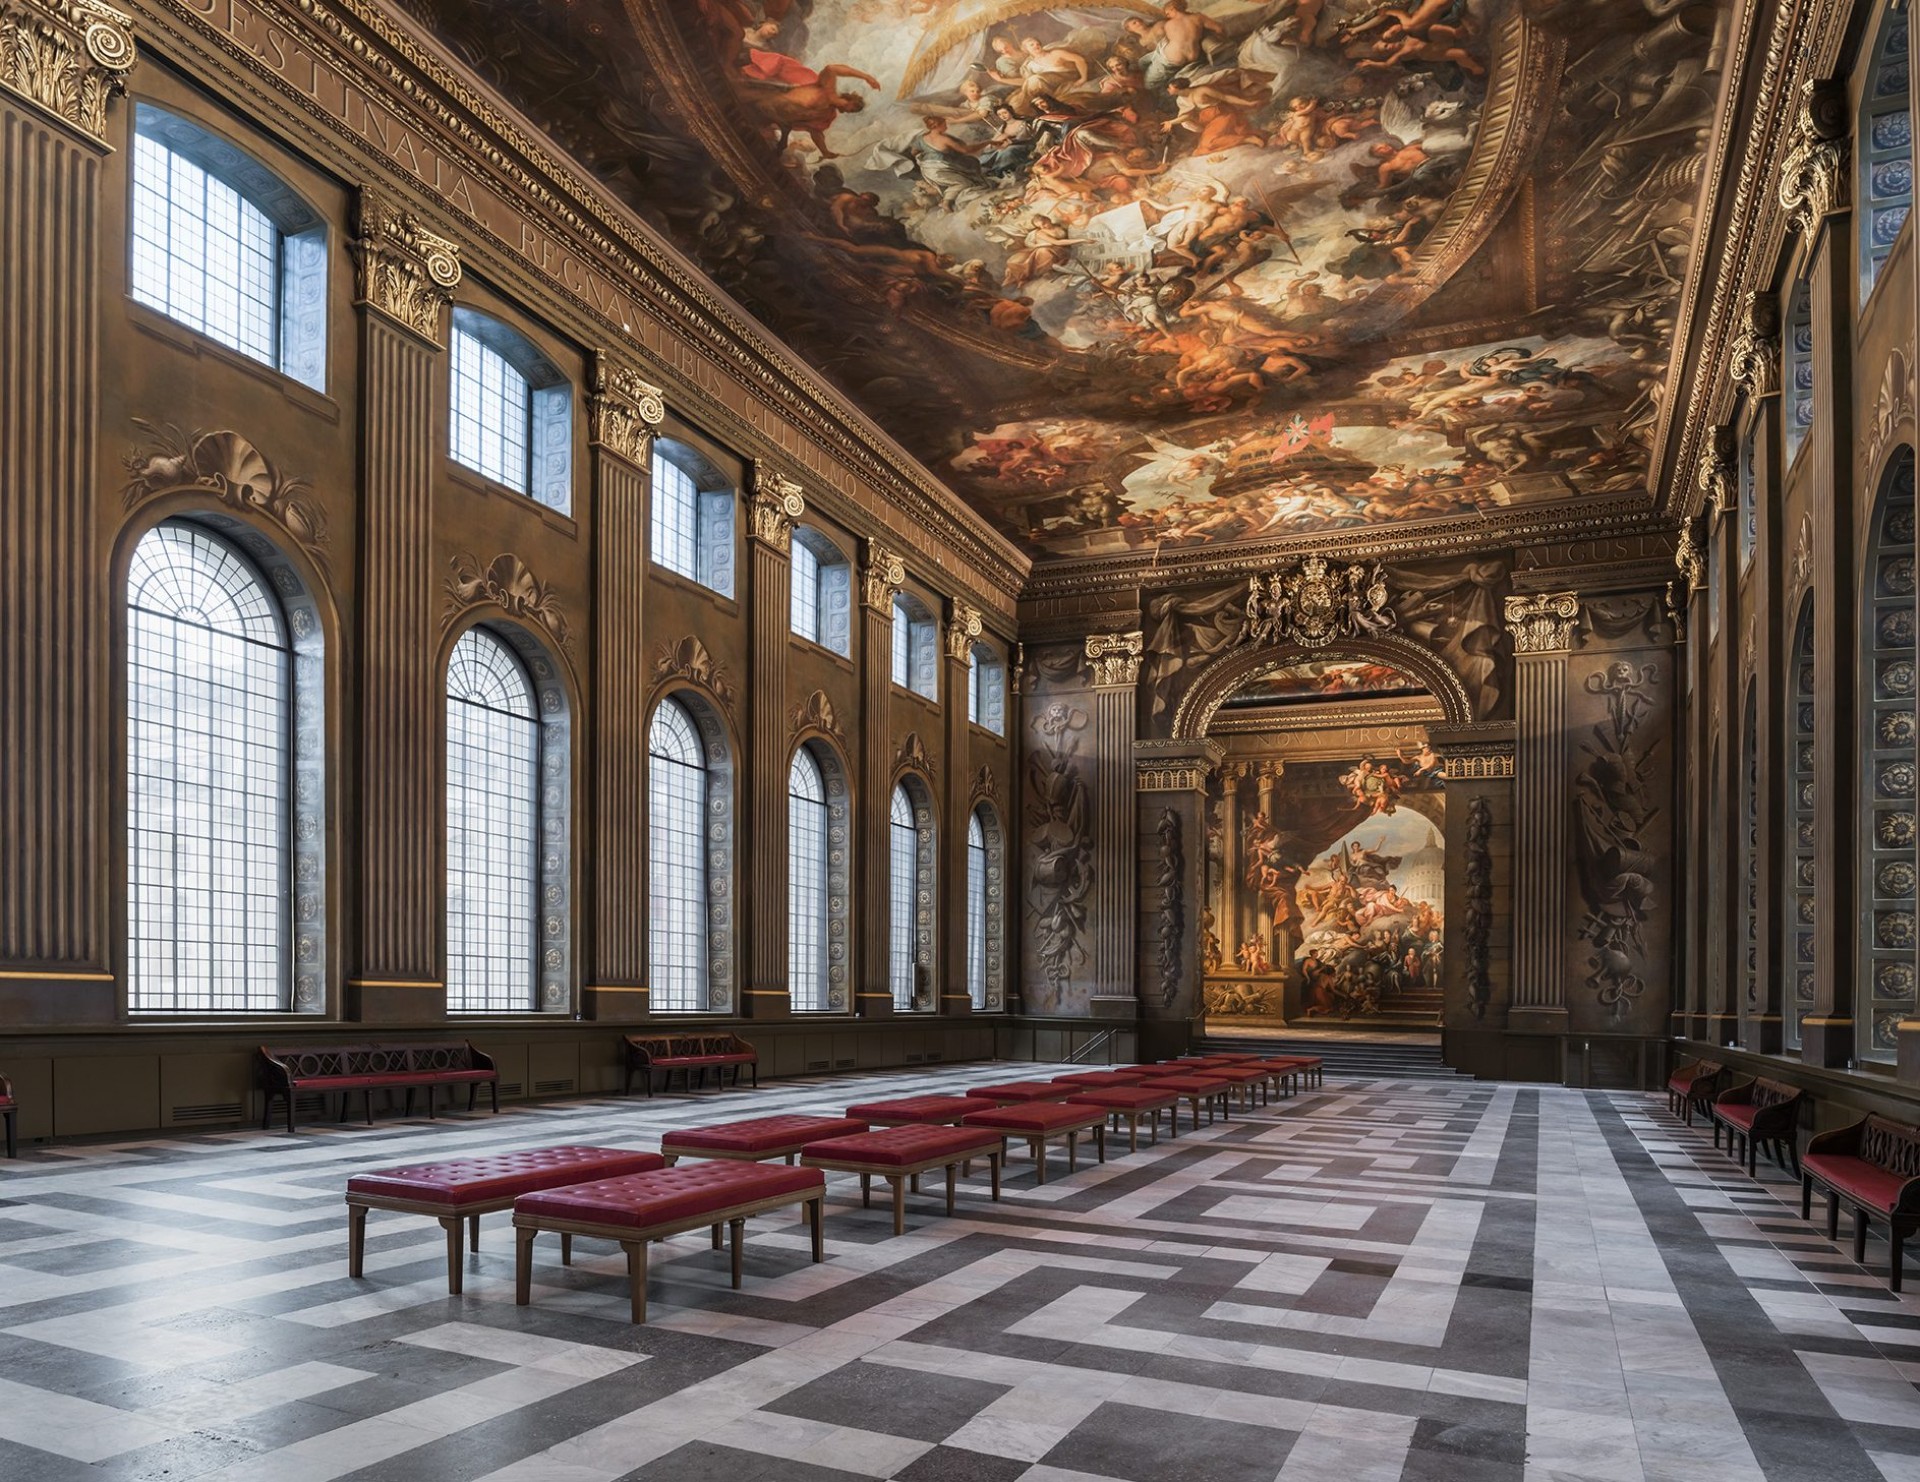 The Painted Hall in London